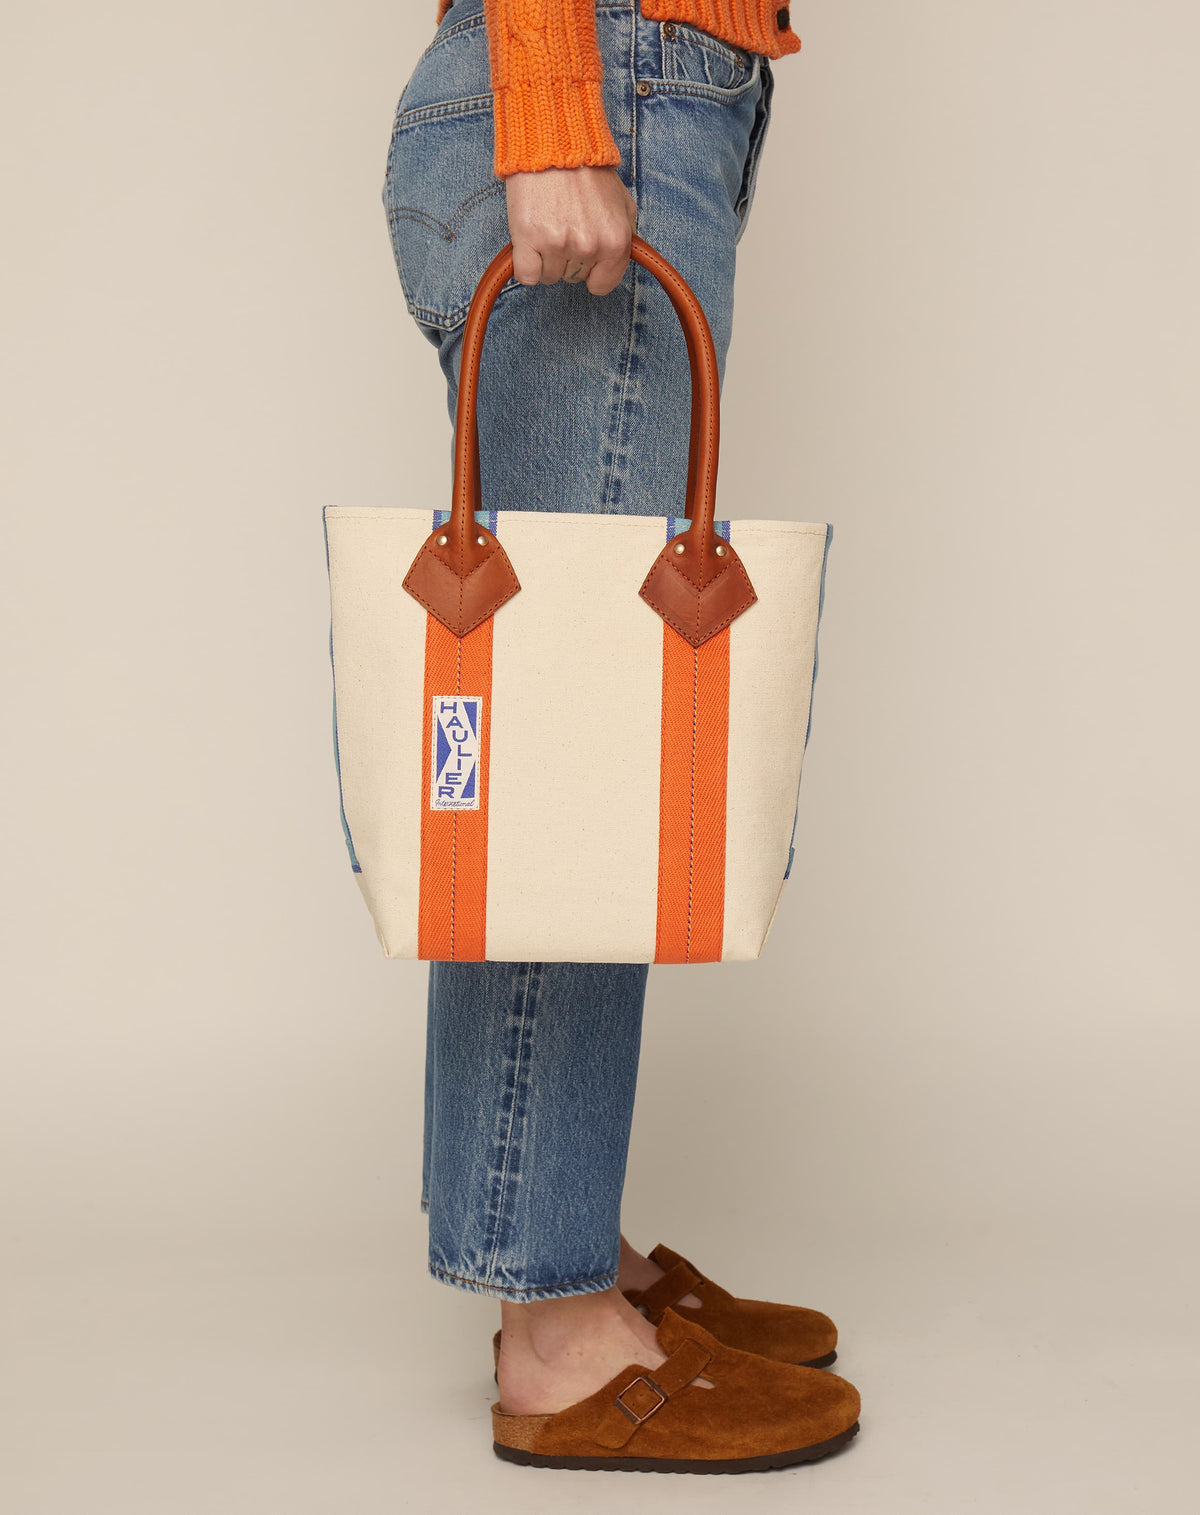 Image of person in blue jeans and tan slides holding a small classic canvas tote bag in natural ecru colour with tan leather handles and contrasting stripes.